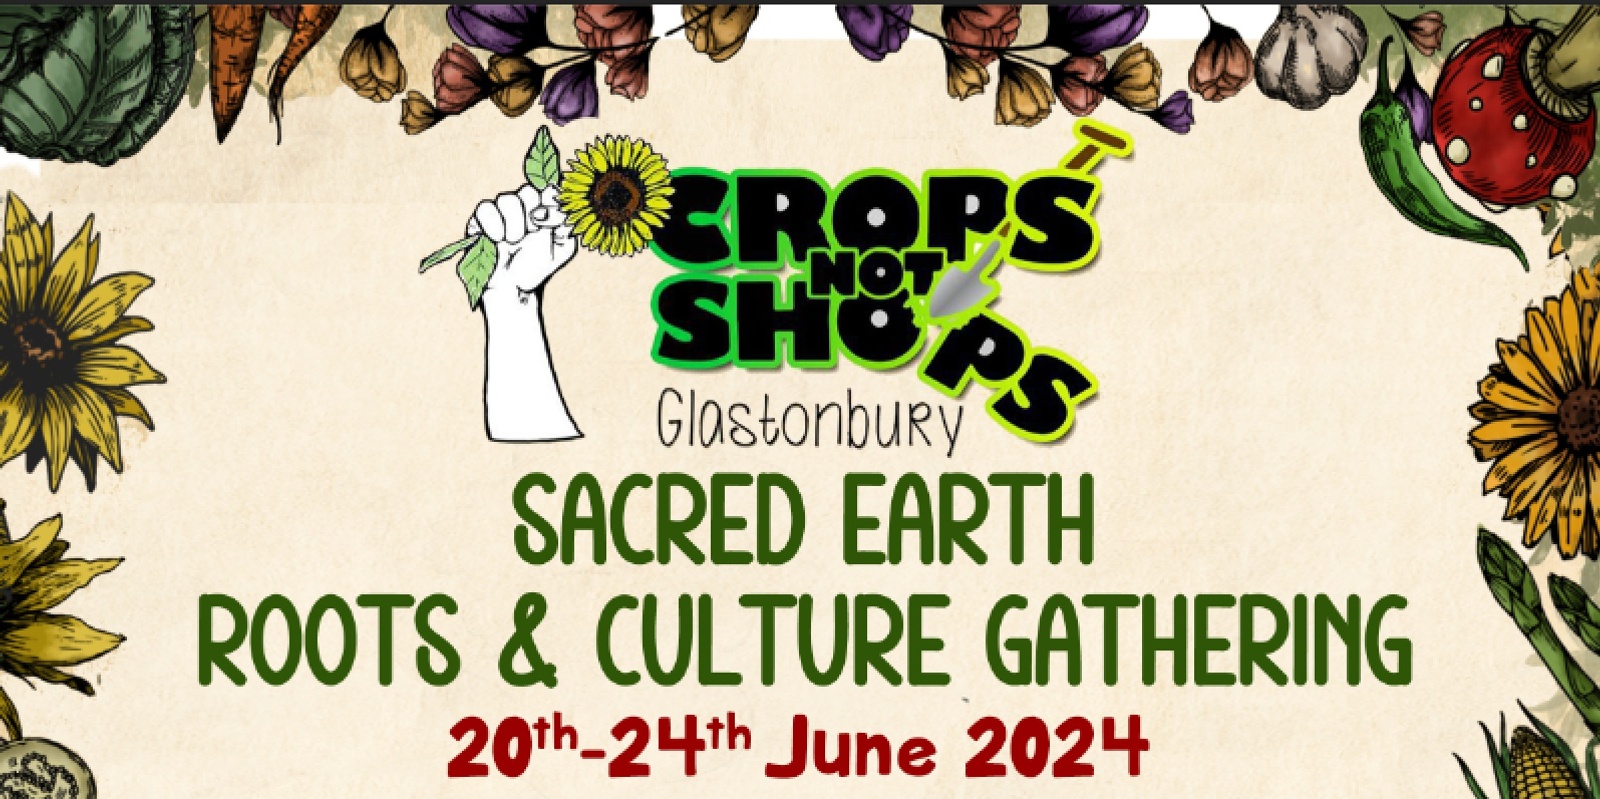 Banner image for Crops Not Shops Summer Solstice Roots & Culture Gathering - 20th-24th June 2024